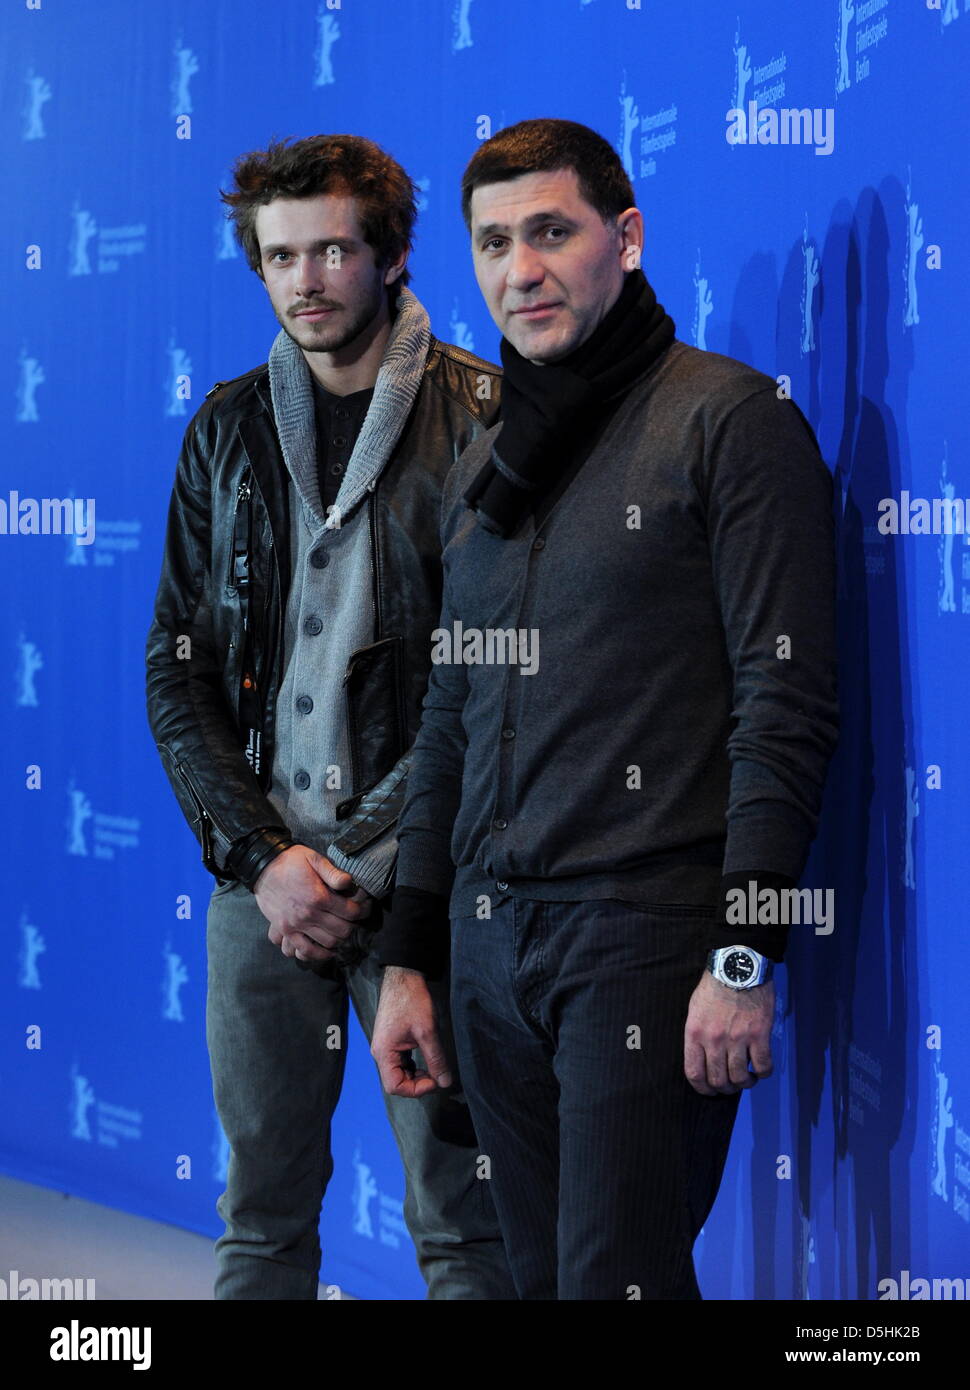 Russian actors Grigoriy Dobrygin (L) and Sergey Puskepalis attend the photocall of the film 'How I Ended This Summer' running in competition during the 60th Berlinale International Film Festival in Berlin, Germany, Wednesday, 17 February 2010. The festival runs until 21 Febuary 2010. Photo: Jörg Carstensen dpa/lbn  +++(c) dpa - Bildfunk+++ Stock Photo